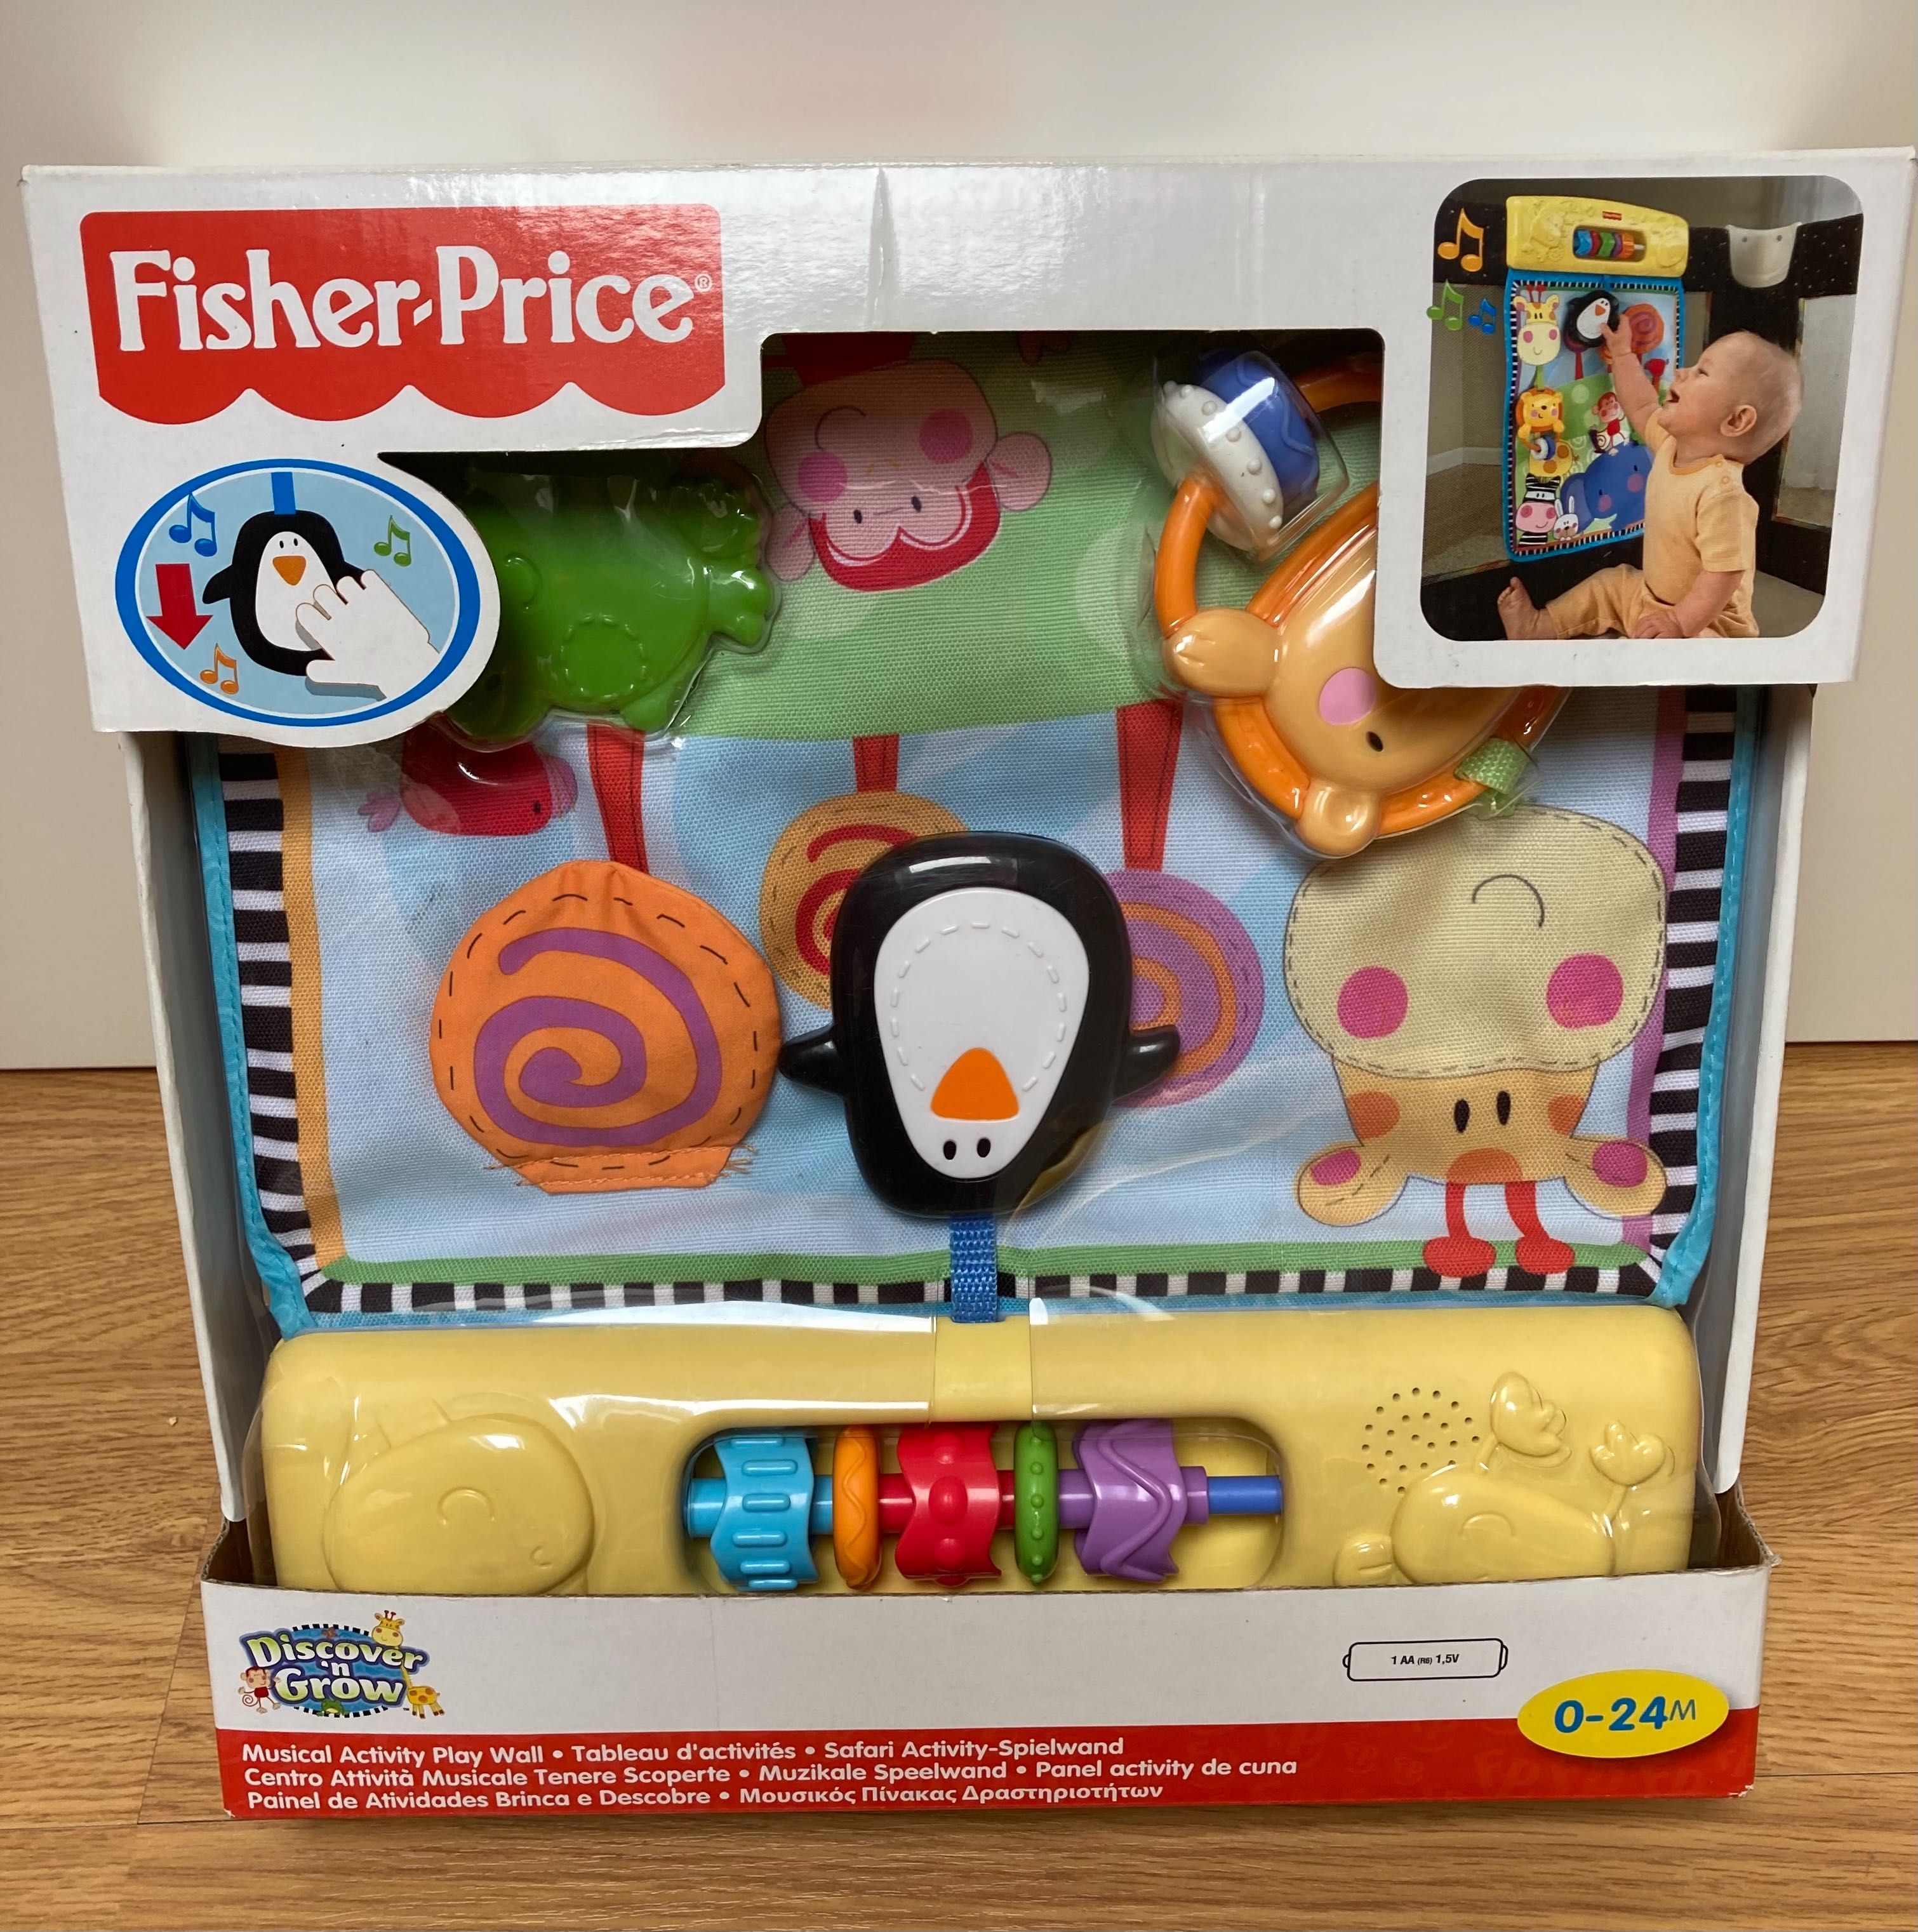 Painel musical Fisher-Price 0-24M